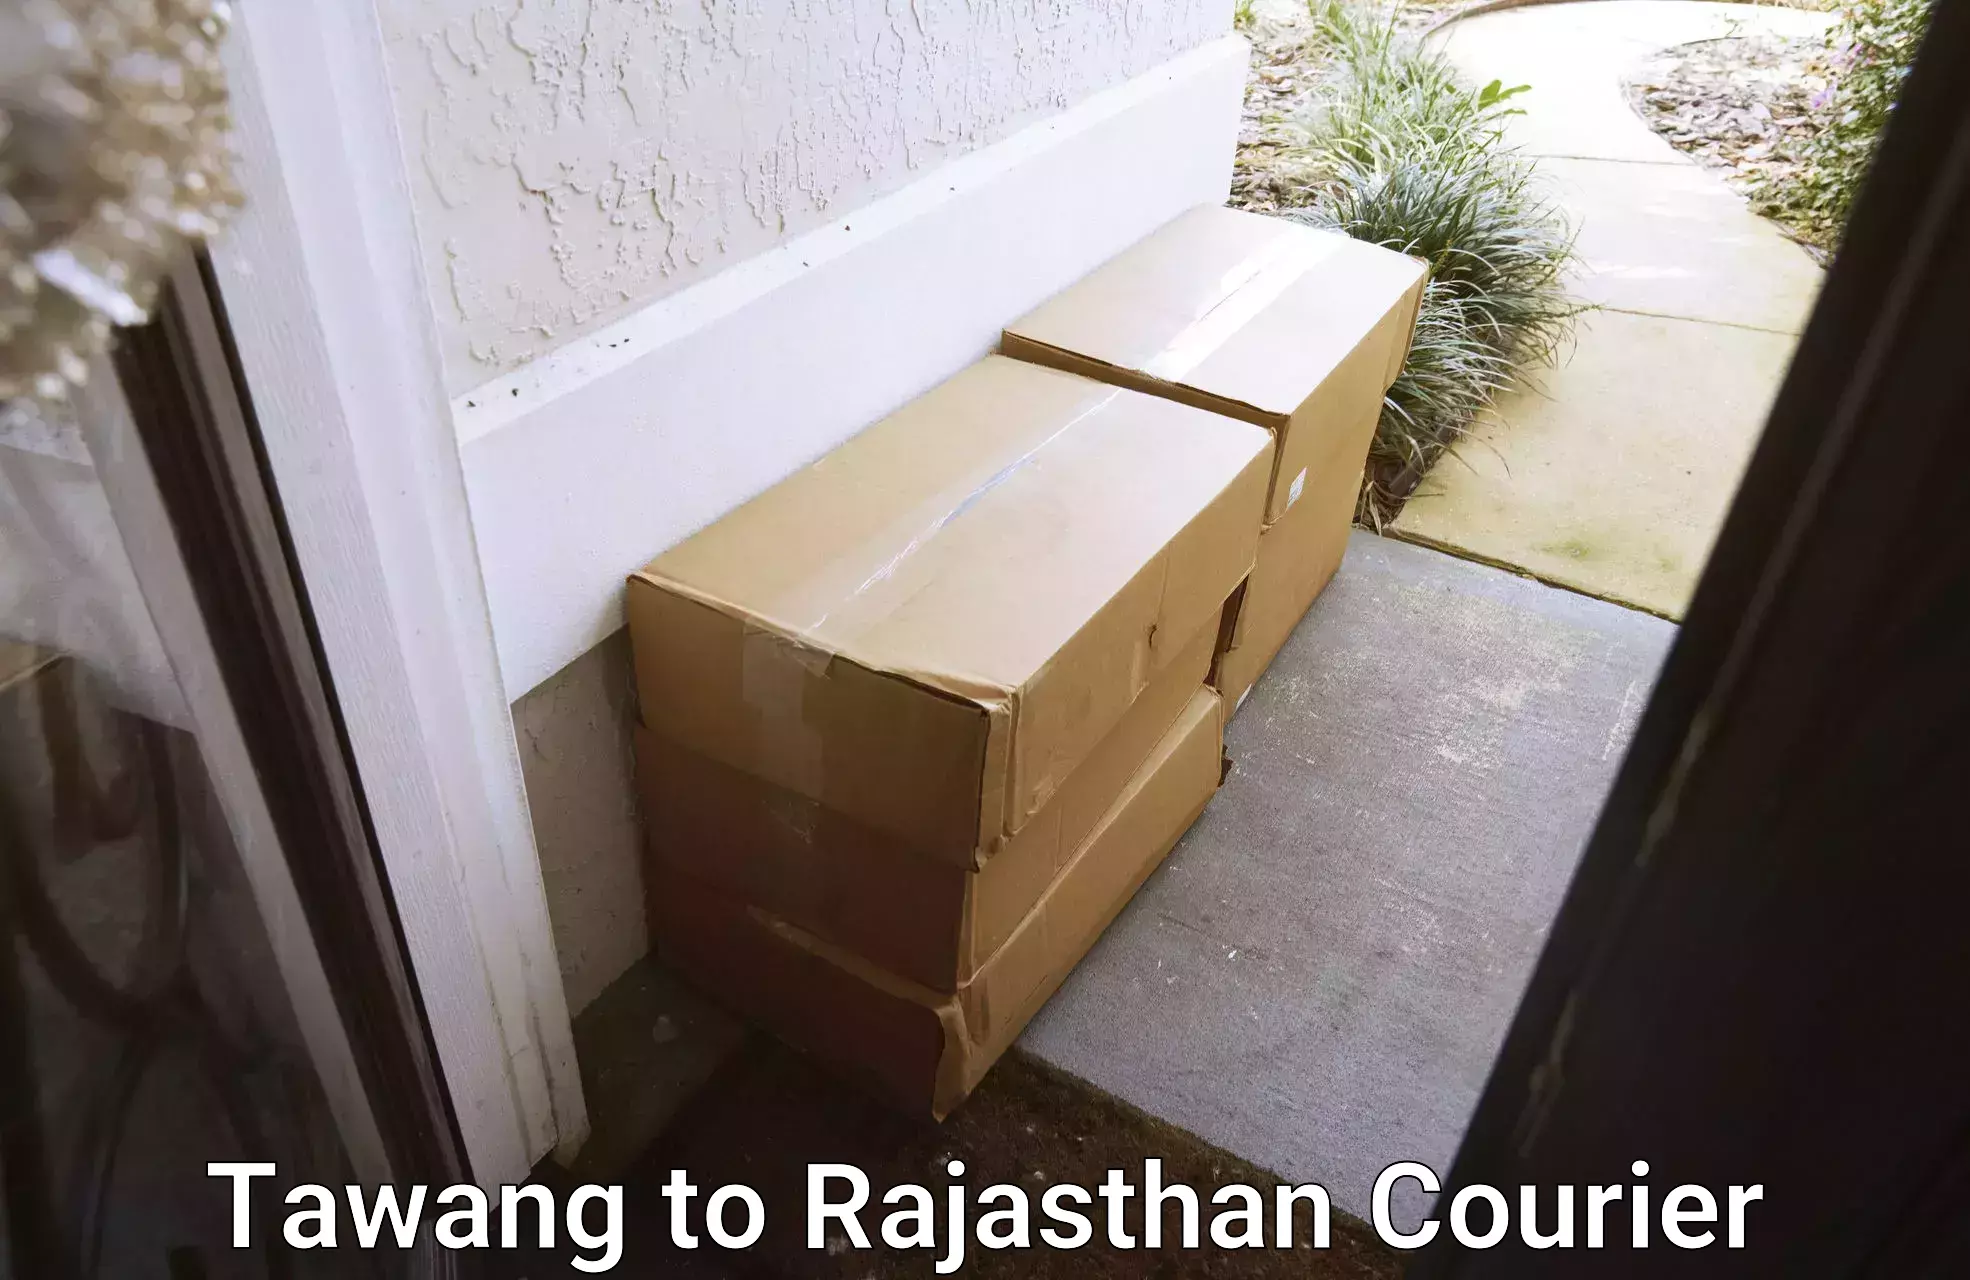 Professional parcel services Tawang to Lohawat